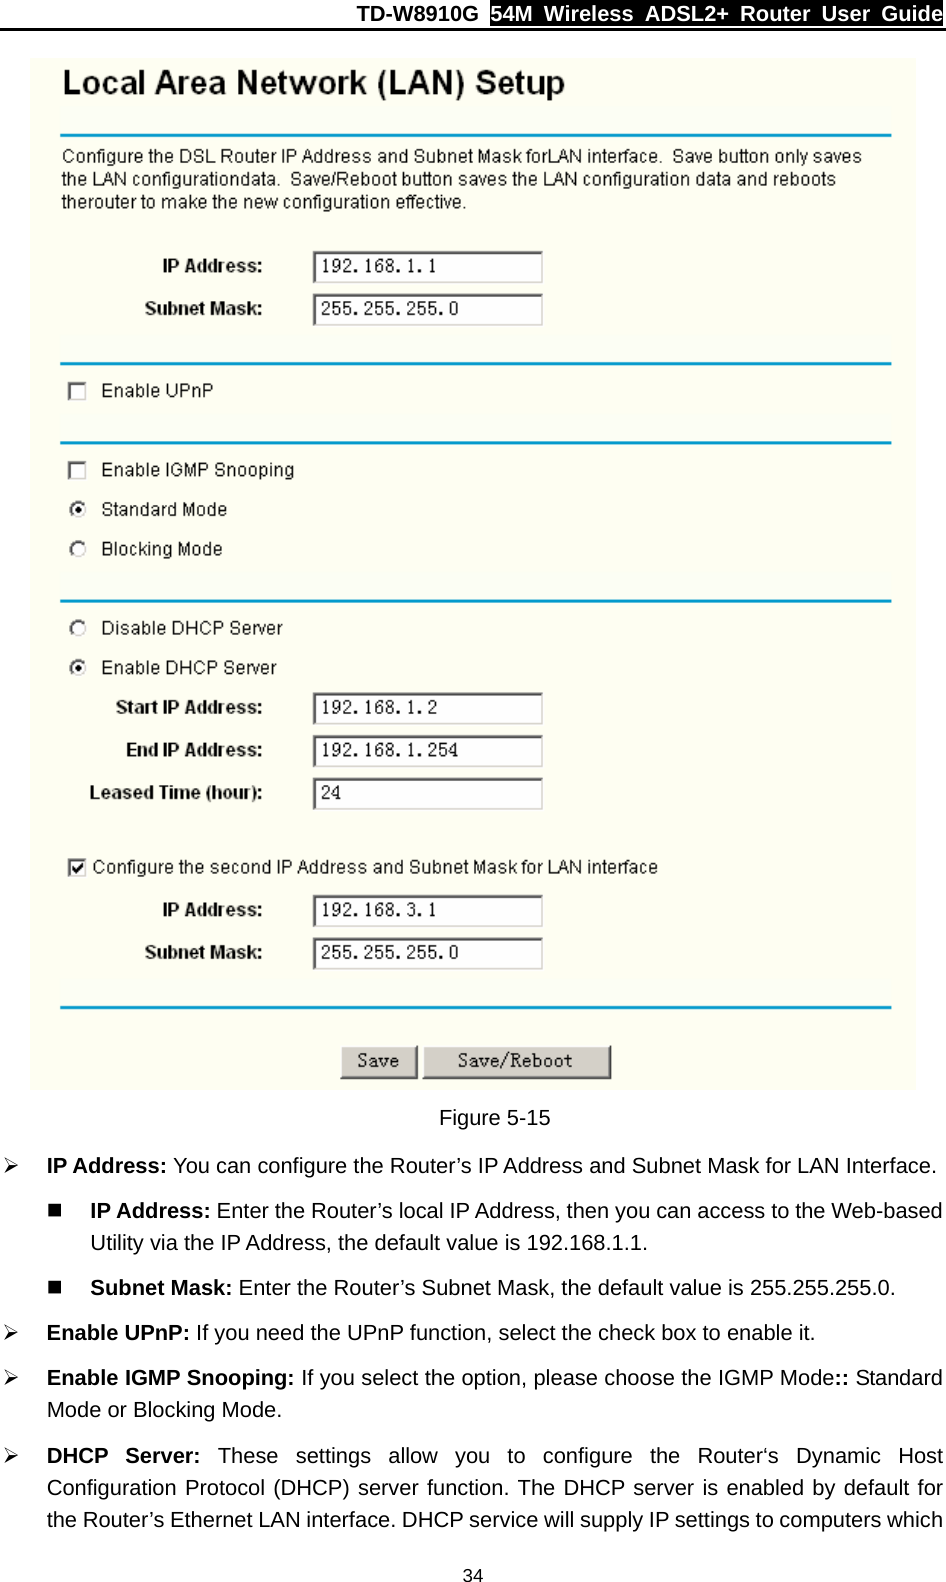 TD-W8910G  54M Wireless ADSL2+ Router User Guide  34 Figure 5-15 ¾ IP Address: You can configure the Router’s IP Address and Subnet Mask for LAN Interface.  IP Address: Enter the Router’s local IP Address, then you can access to the Web-based Utility via the IP Address, the default value is 192.168.1.1.  Subnet Mask: Enter the Router’s Subnet Mask, the default value is 255.255.255.0. ¾ Enable UPnP: If you need the UPnP function, select the check box to enable it. ¾ Enable IGMP Snooping: If you select the option, please choose the IGMP Mode:: Standard Mode or Blocking Mode. ¾ DHCP Server: These settings allow you to configure the Router‘s Dynamic Host Configuration Protocol (DHCP) server function. The DHCP server is enabled by default for the Router’s Ethernet LAN interface. DHCP service will supply IP settings to computers which 